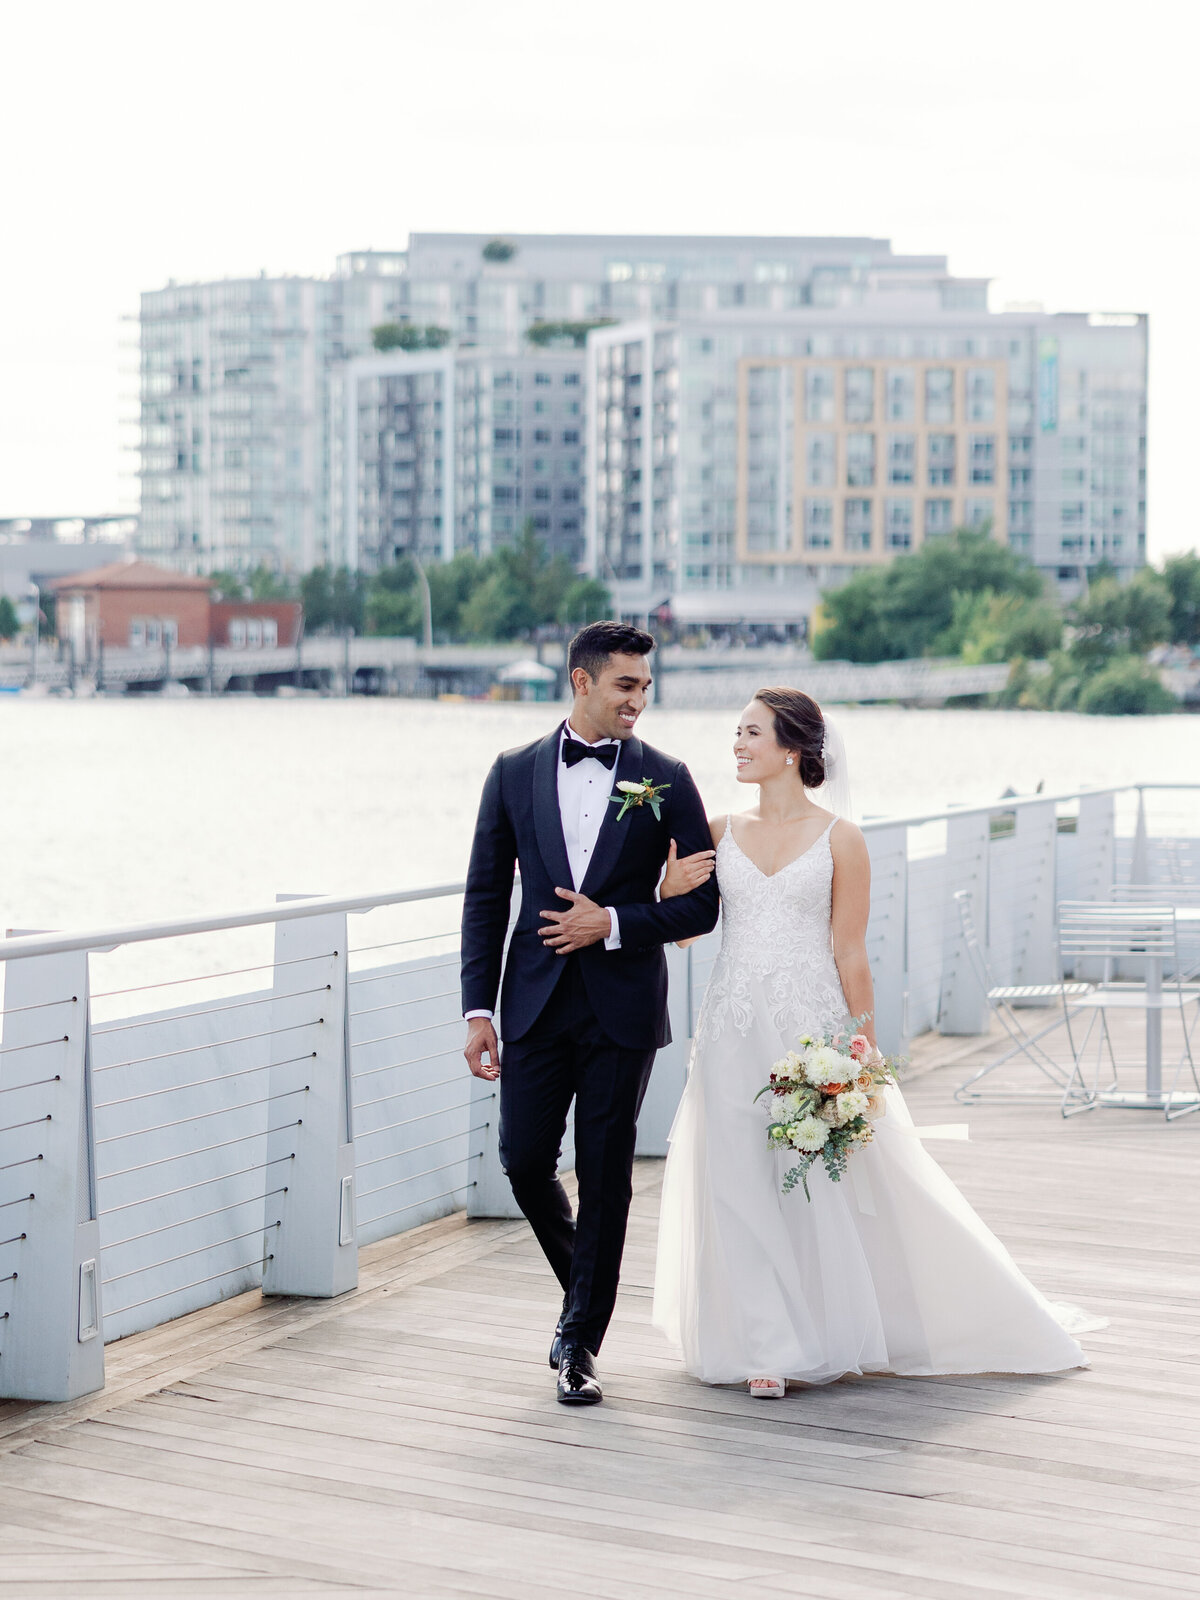 A bride and groom walk together down the dock at the wharf in washington dc